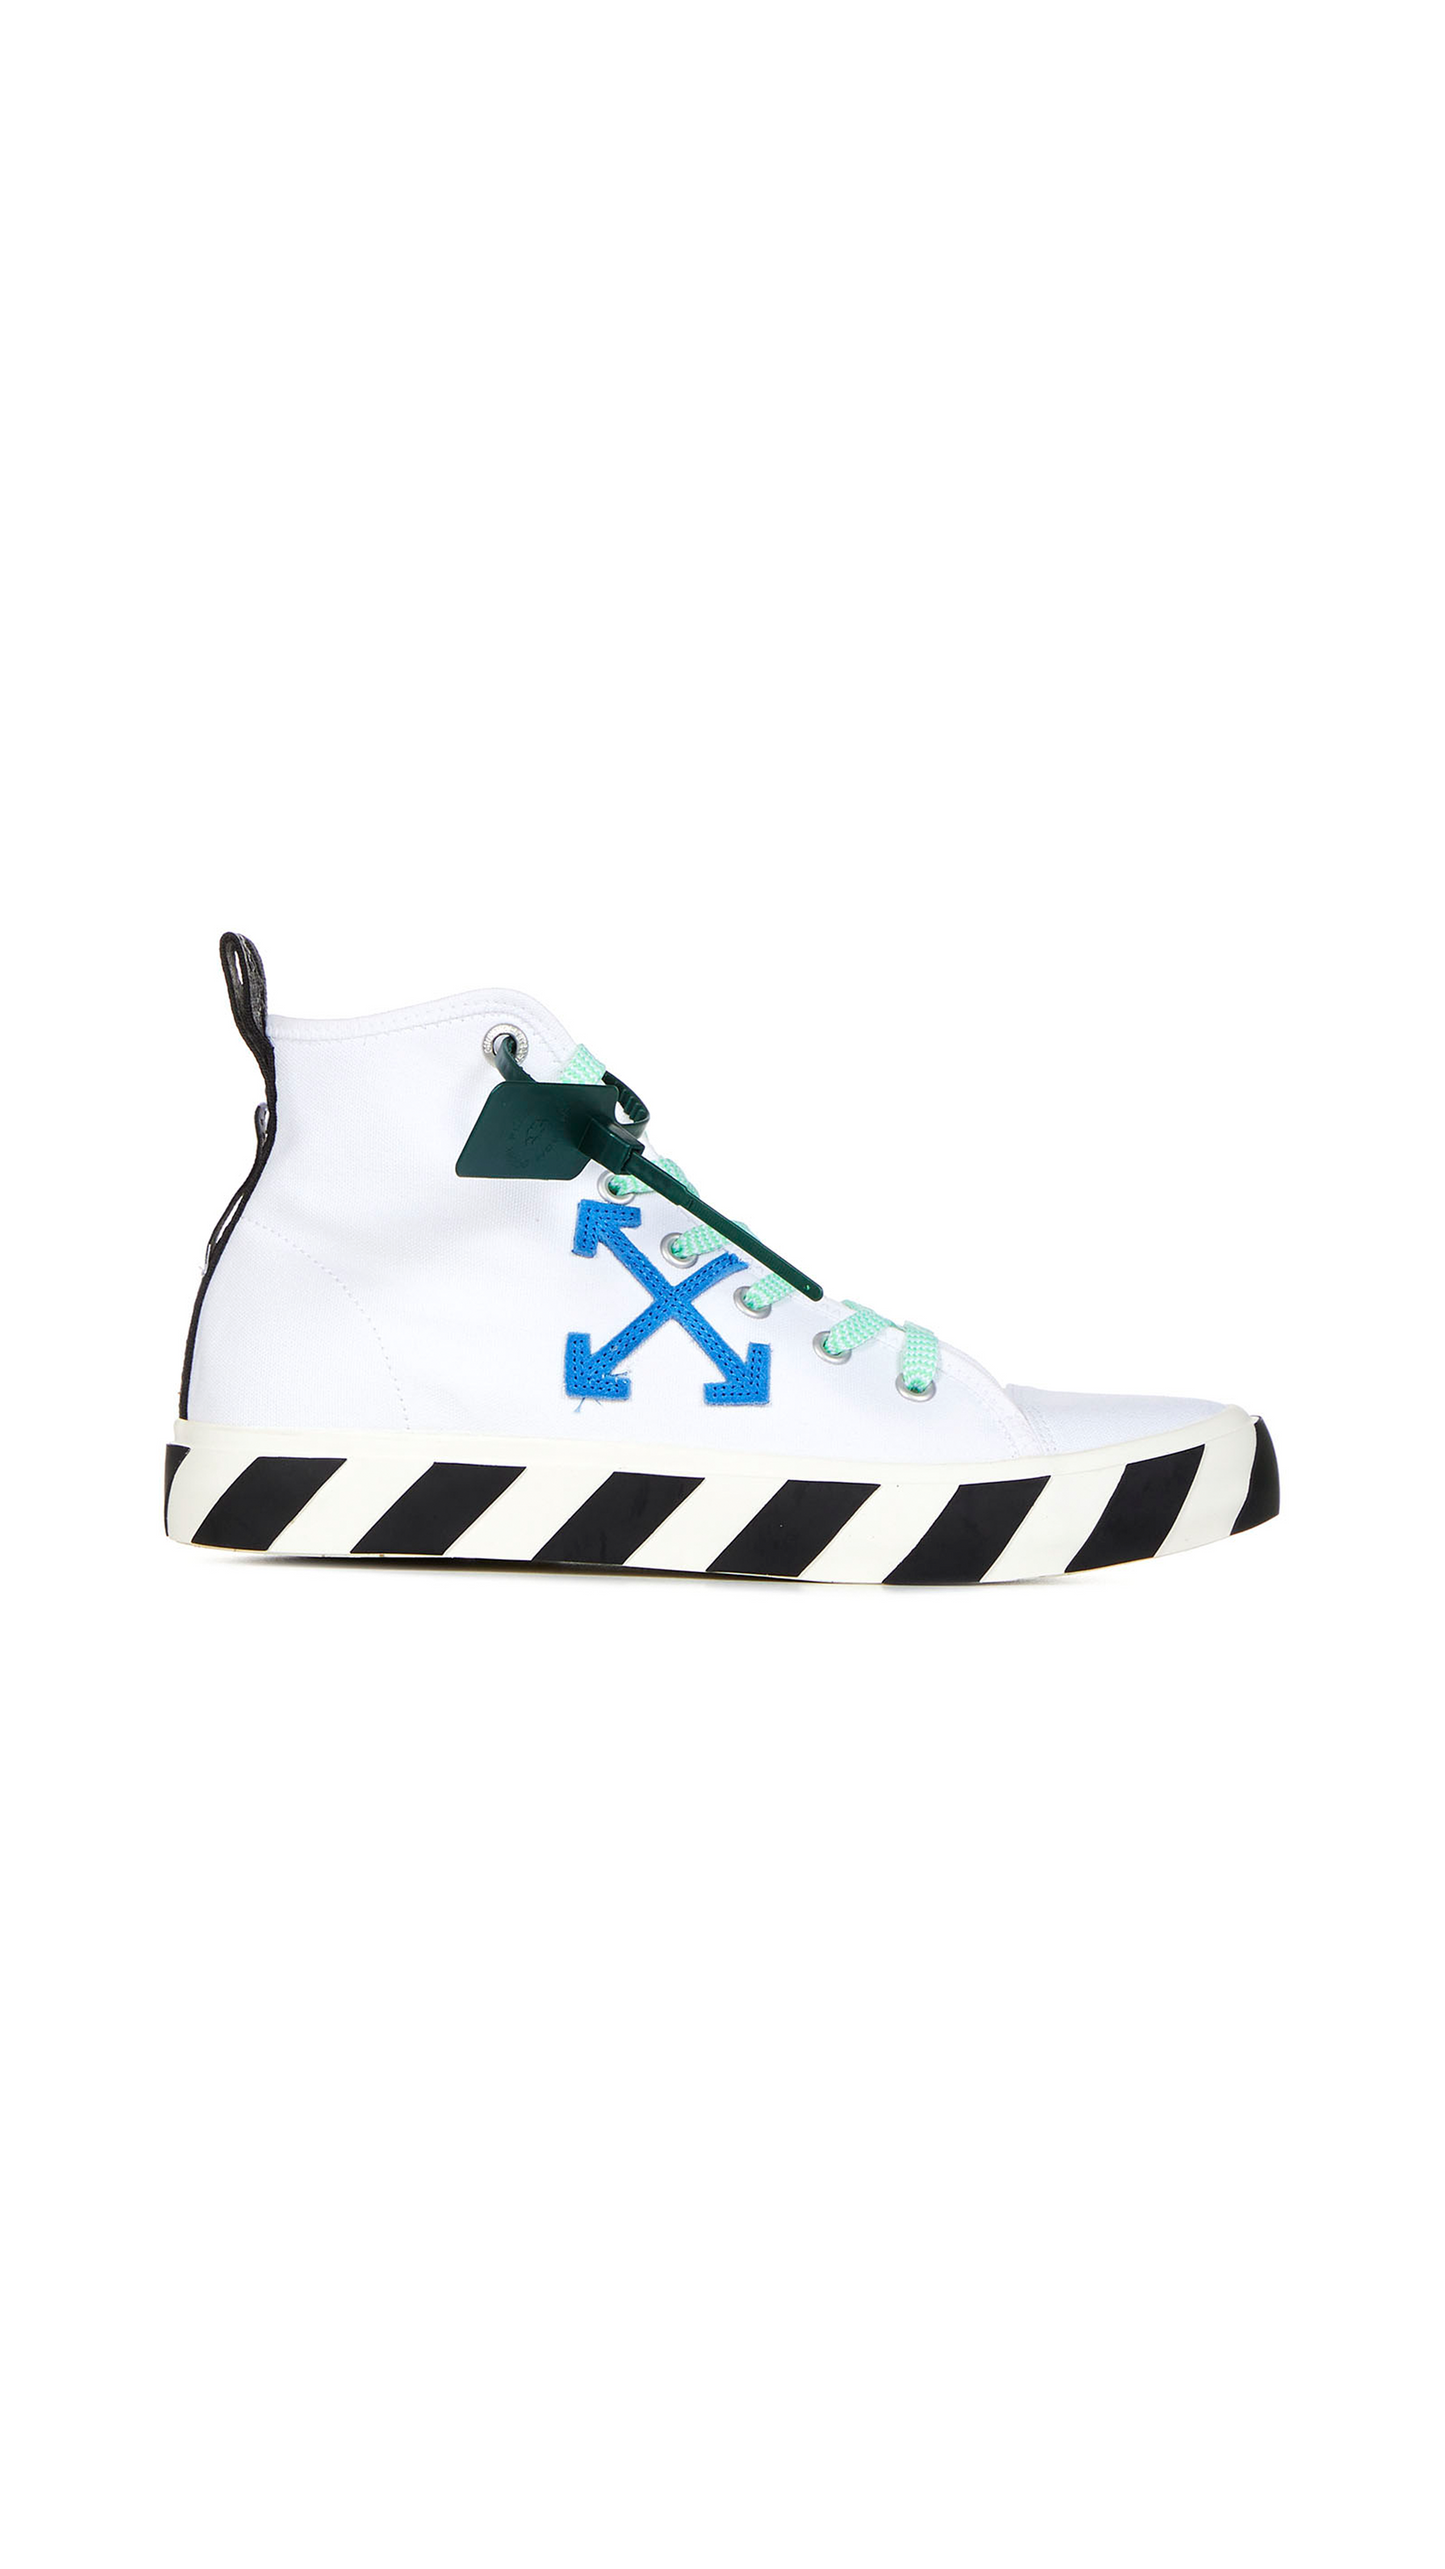 Mid Top Vulcanized Sneakers - White/Black/Blue/Green